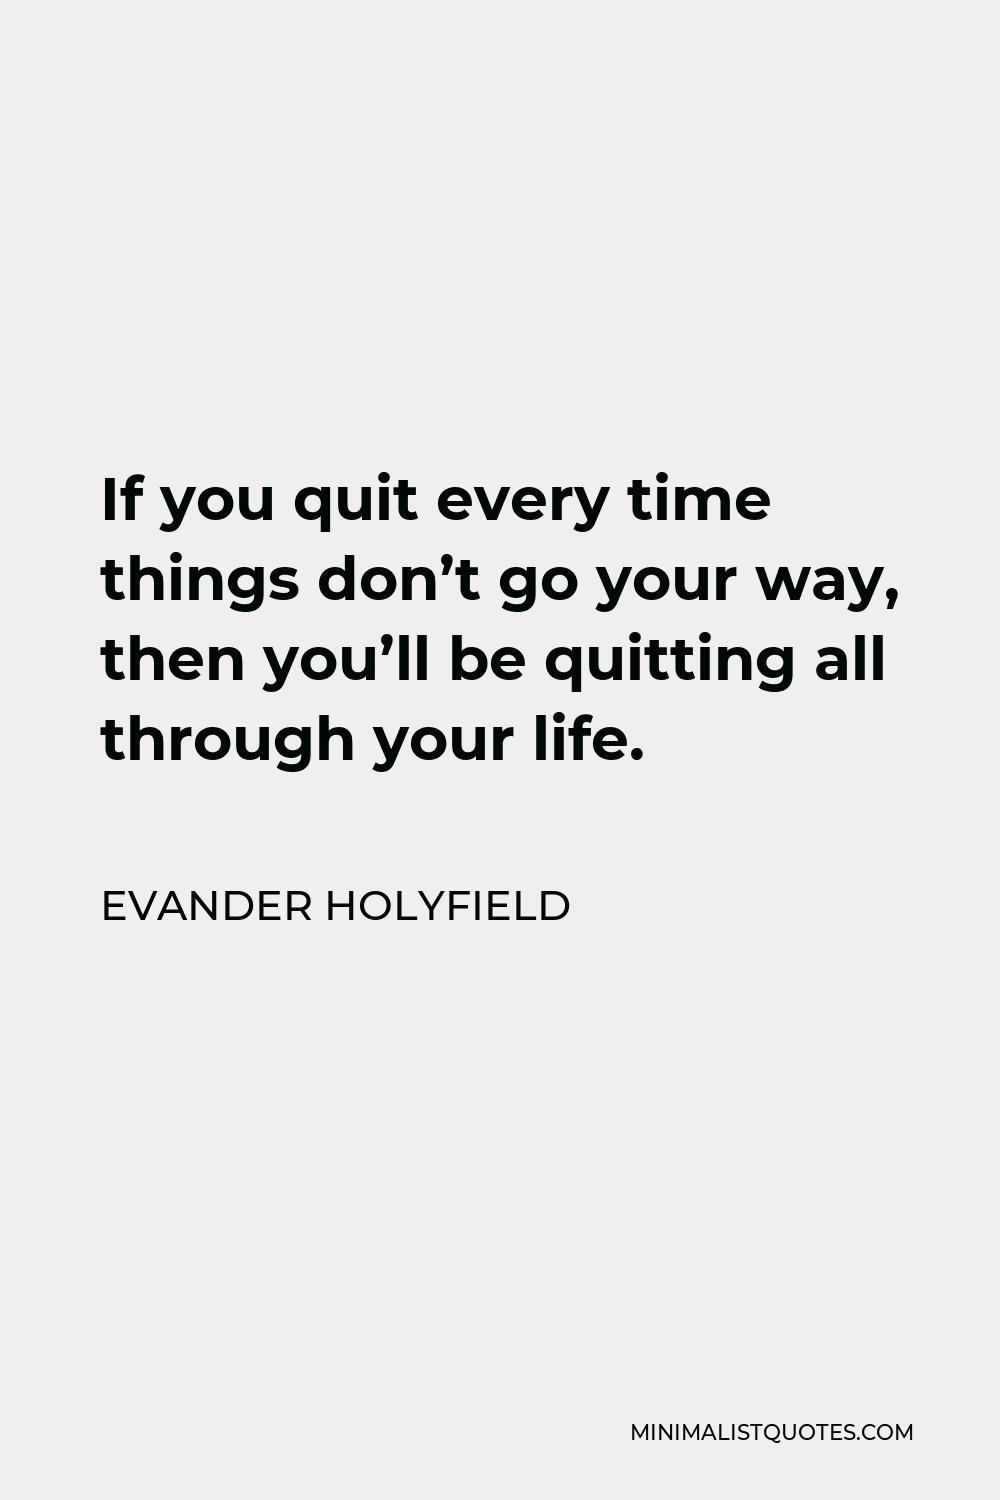 Evander Holyfield Quote - If you quit every time things don’t go your way, then you’ll be quitting all through your life.